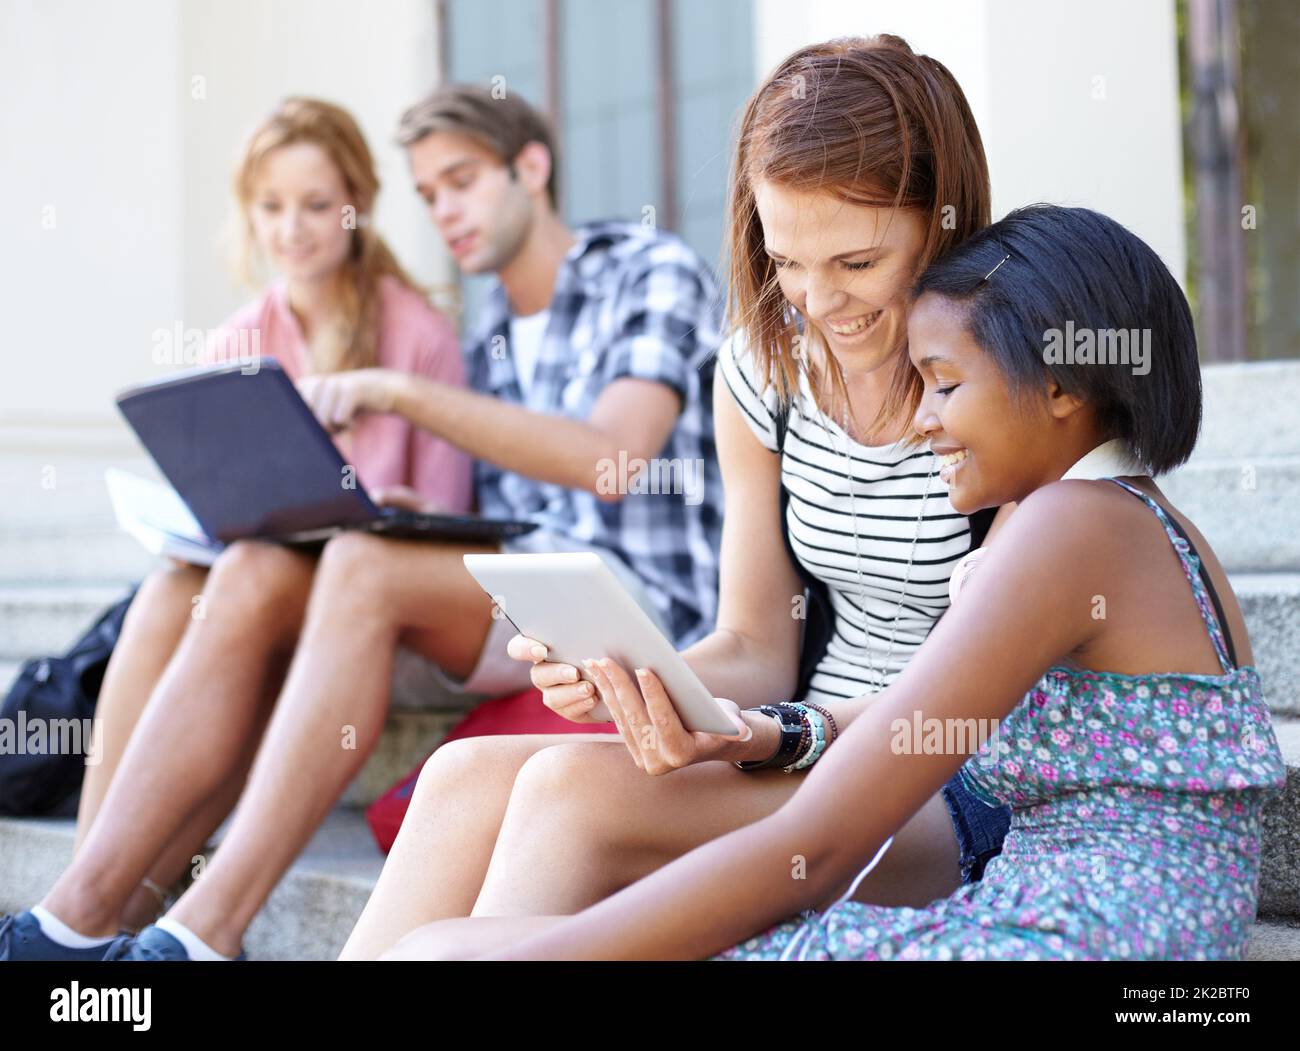 Technological teens. Young teens looking at their laptops and digital tablets as they socializing outdoors. Stock Photo